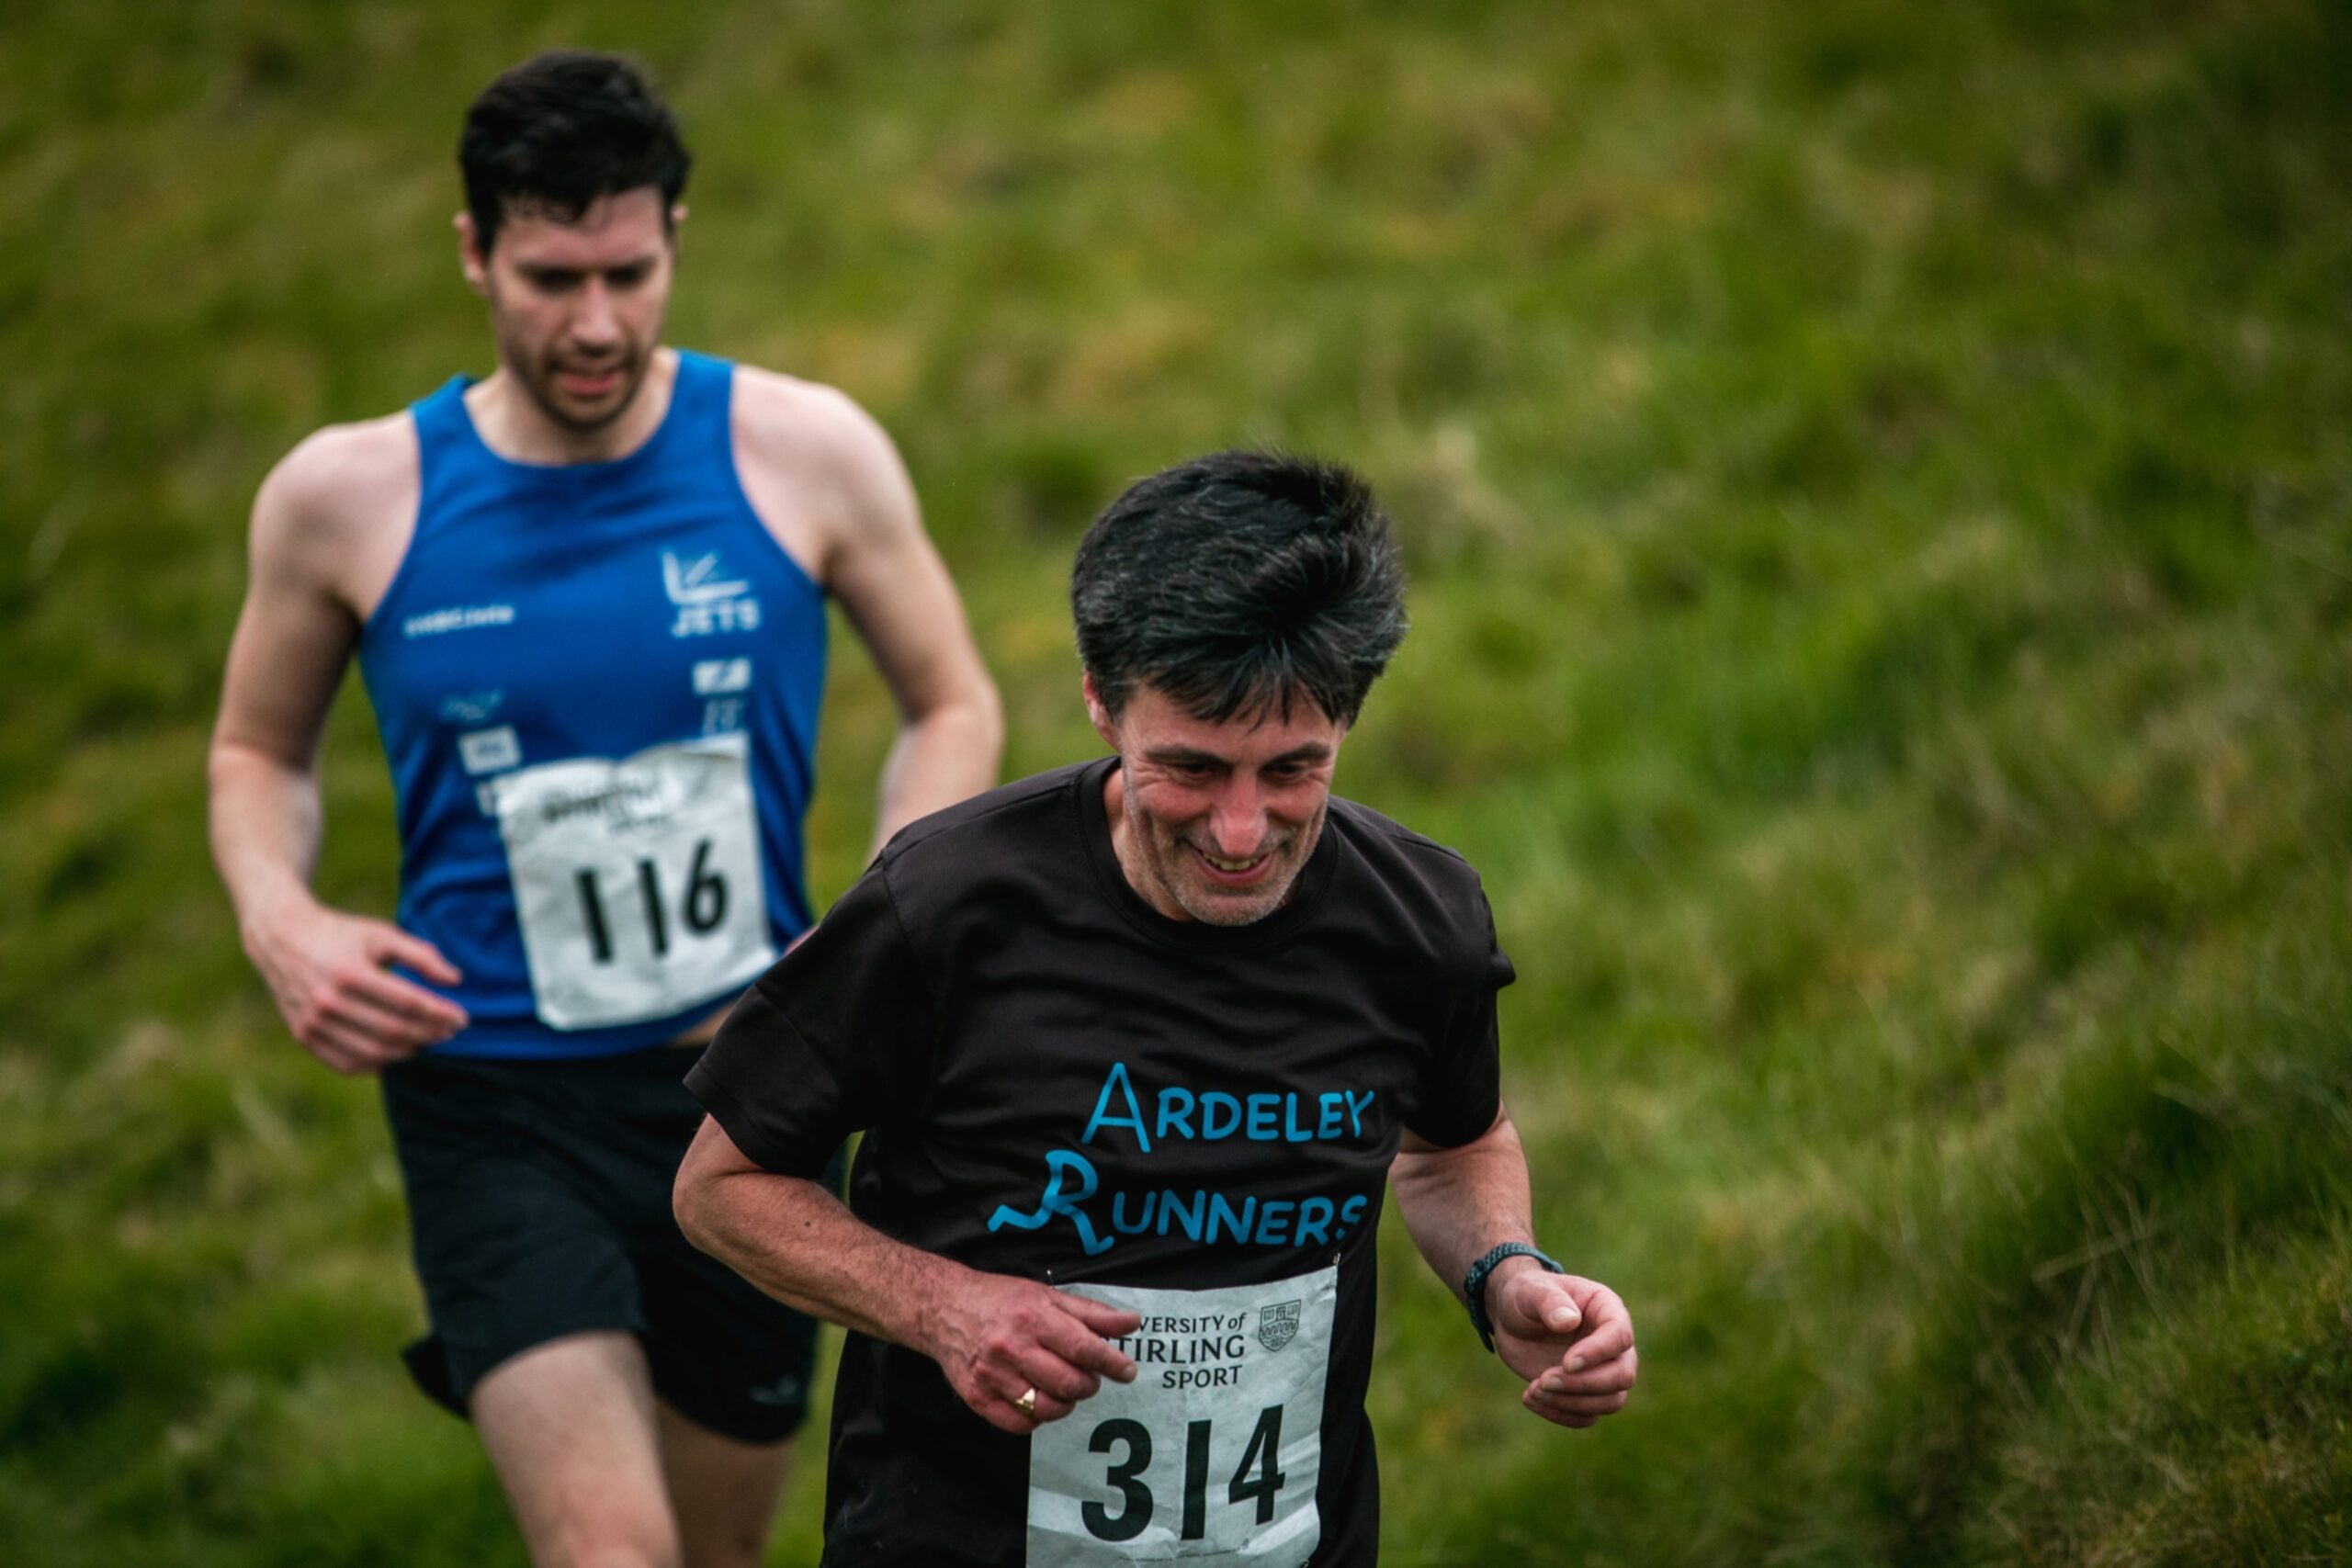 Scott Findlay, number 116 and Simon Philpott, number 314 during the Dumyat Hill Race.